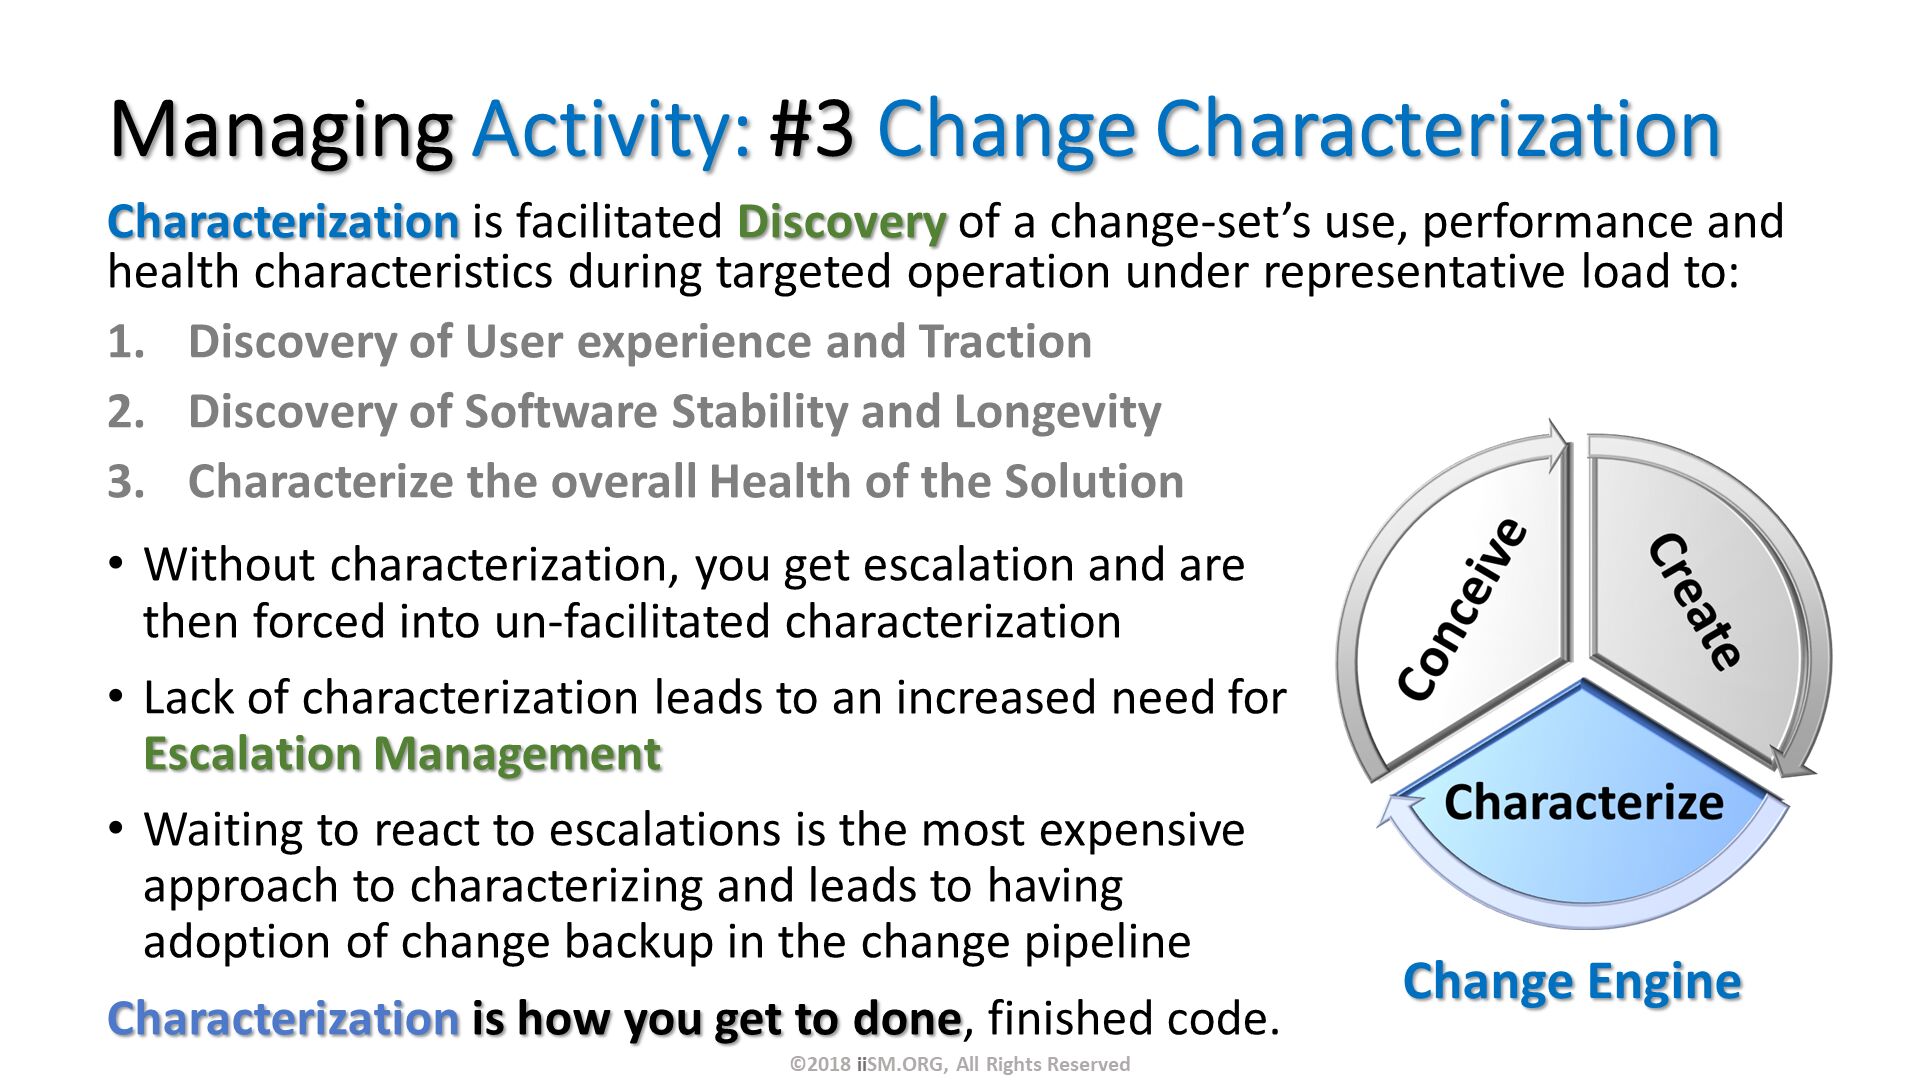 Managing Activity: #3 Change Characterization. Characterization is facilitated Discovery of a change-set’s use, performance and health characteristics during targeted operation under representative load to:
Discovery of User experience and Traction
Discovery of Software Stability and Longevity
Characterize the overall Health of the Solution. Without characterization, you get escalation and are then forced into un-facilitated characterization
Lack of characterization leads to an increased need for Escalation Management 
Waiting to react to escalations is the most expensive approach to characterizing and leads to having adoption of change backup in the change pipeline 
Characterization is how you get to done, finished code. Change Engine . ©2018 iiSM.ORG, All Rights Reserved. 